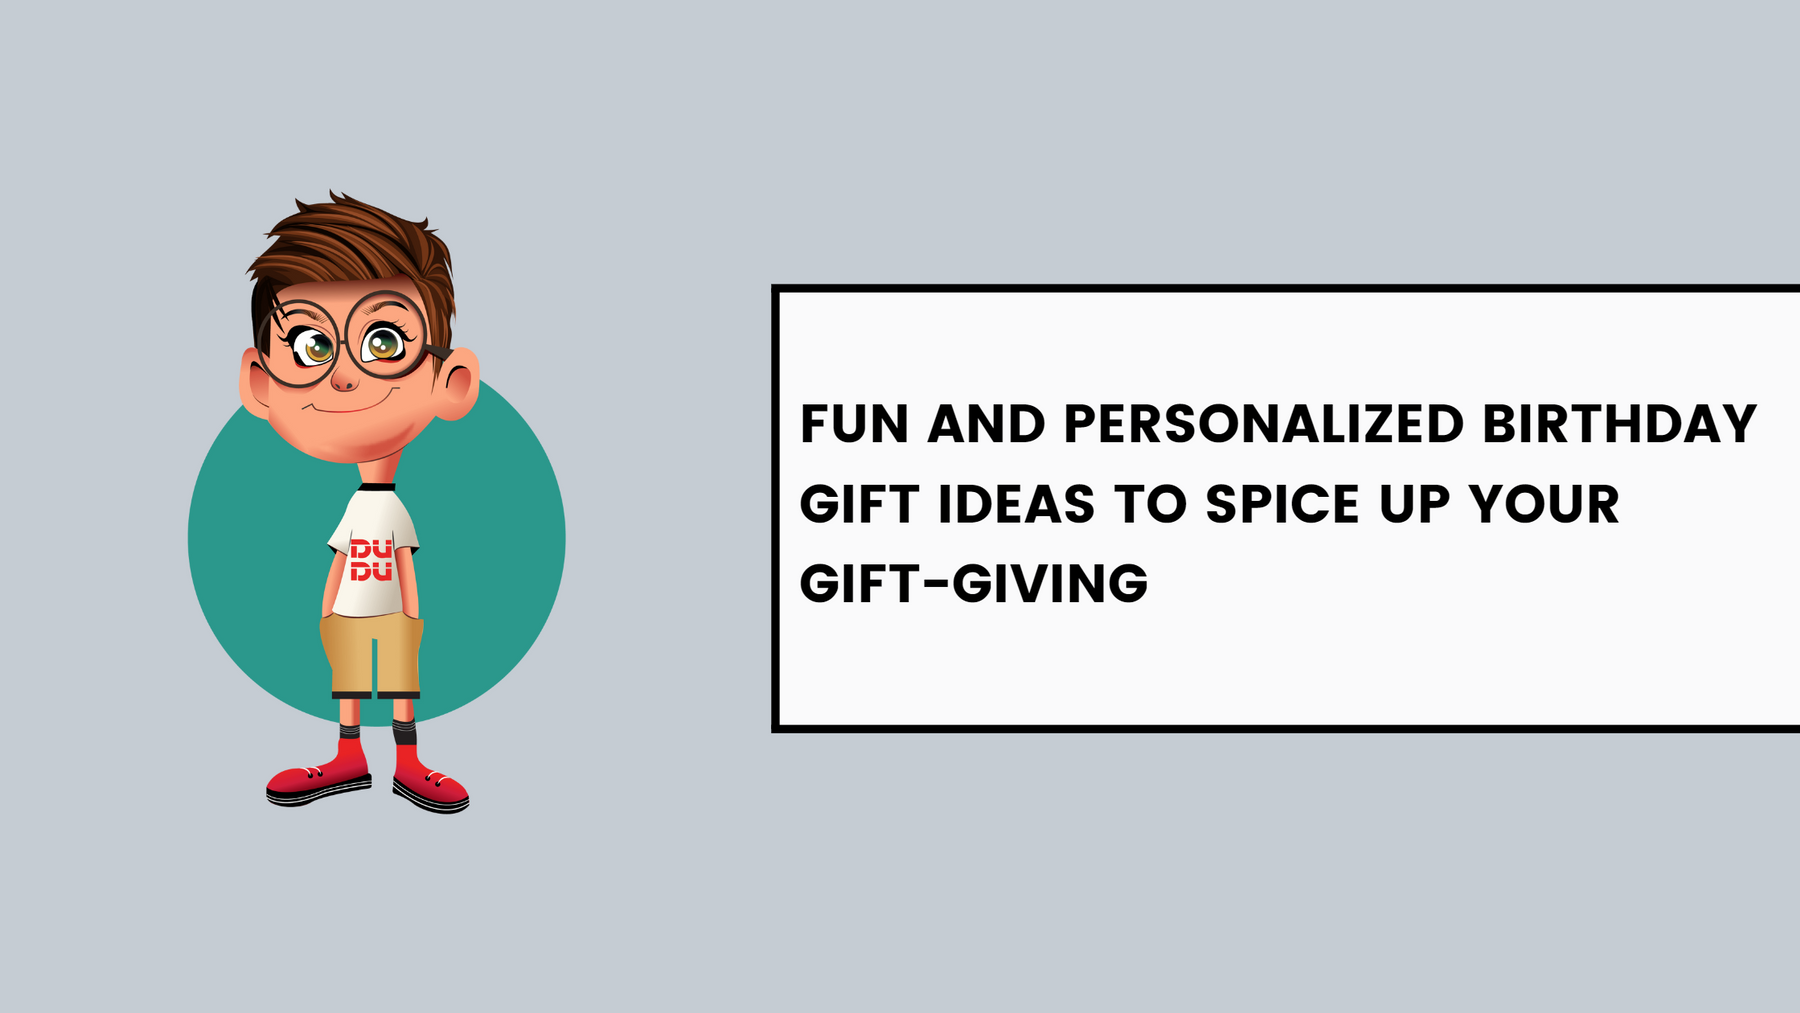 Fun and Personalized Birthday Gift Ideas to Spice Up Your Gift-Giving